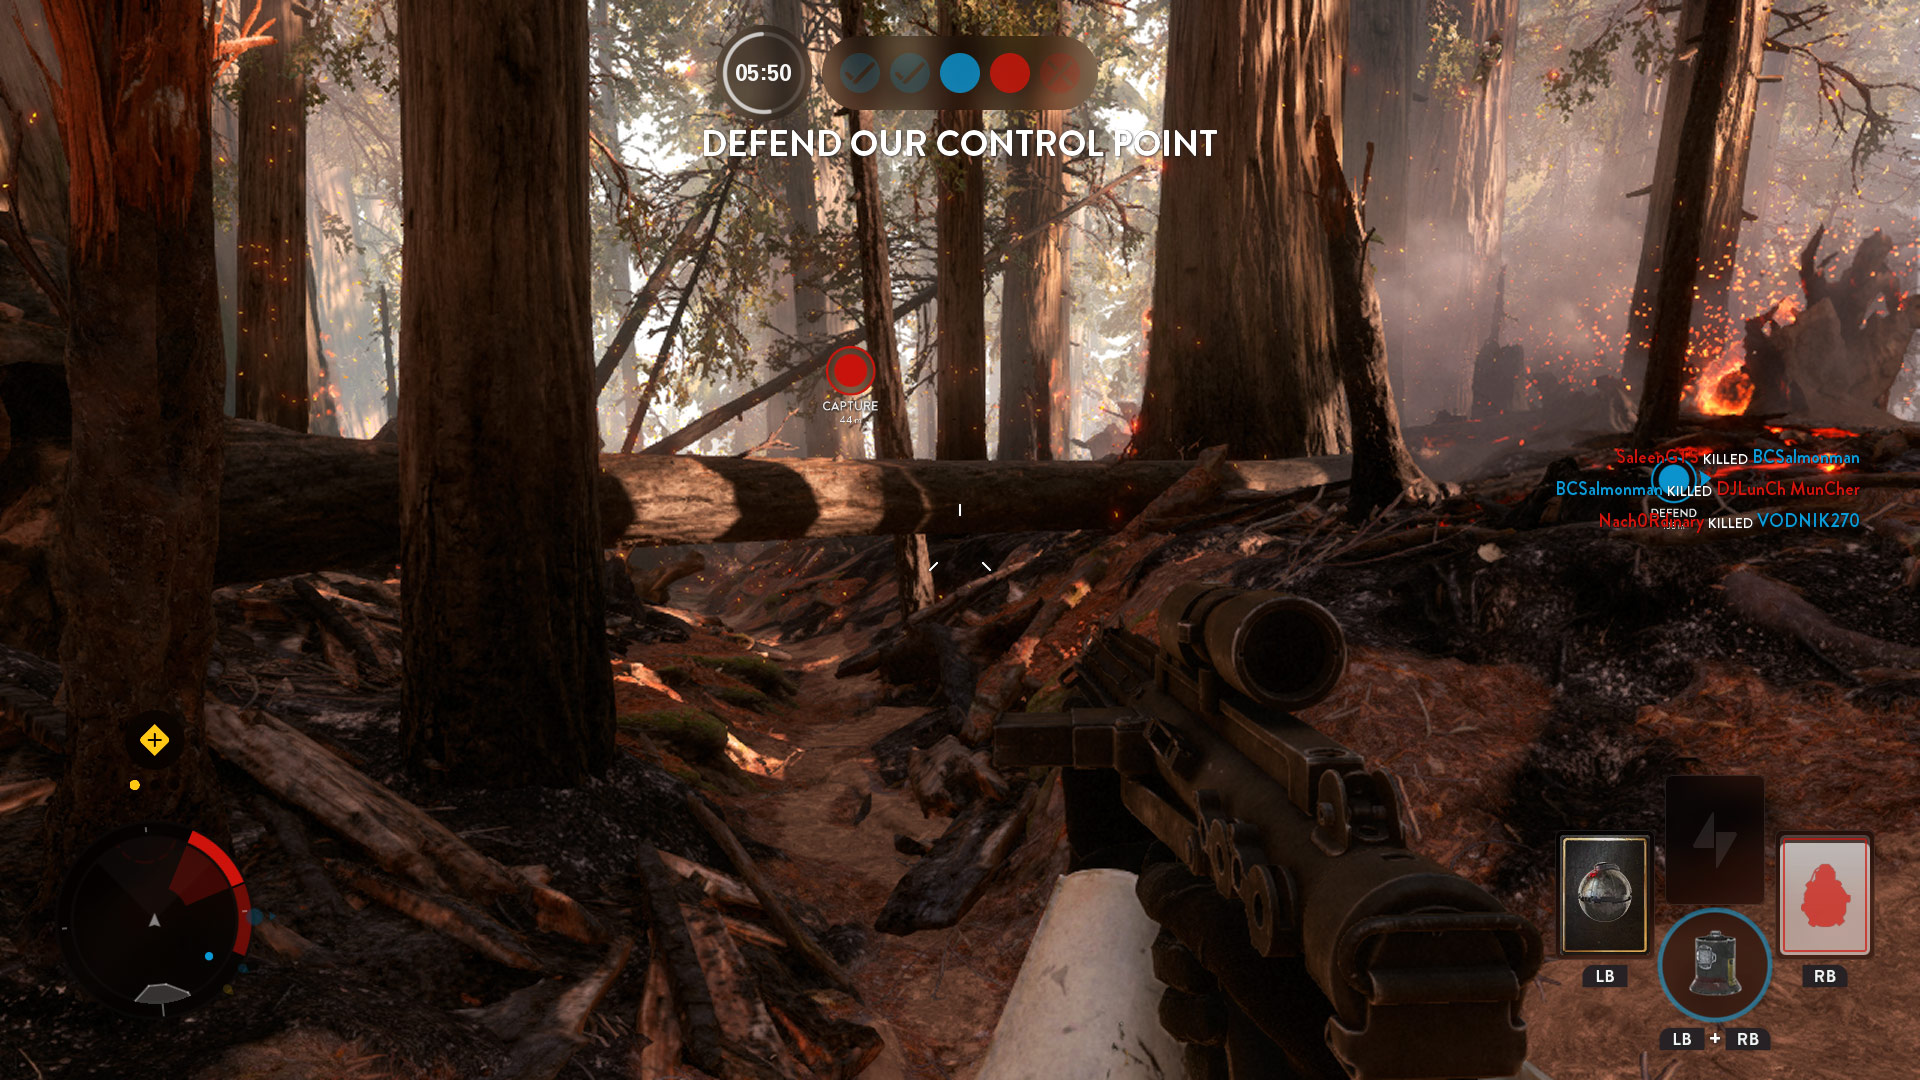 Star Wars Battlefront Only Lacked Launch Content